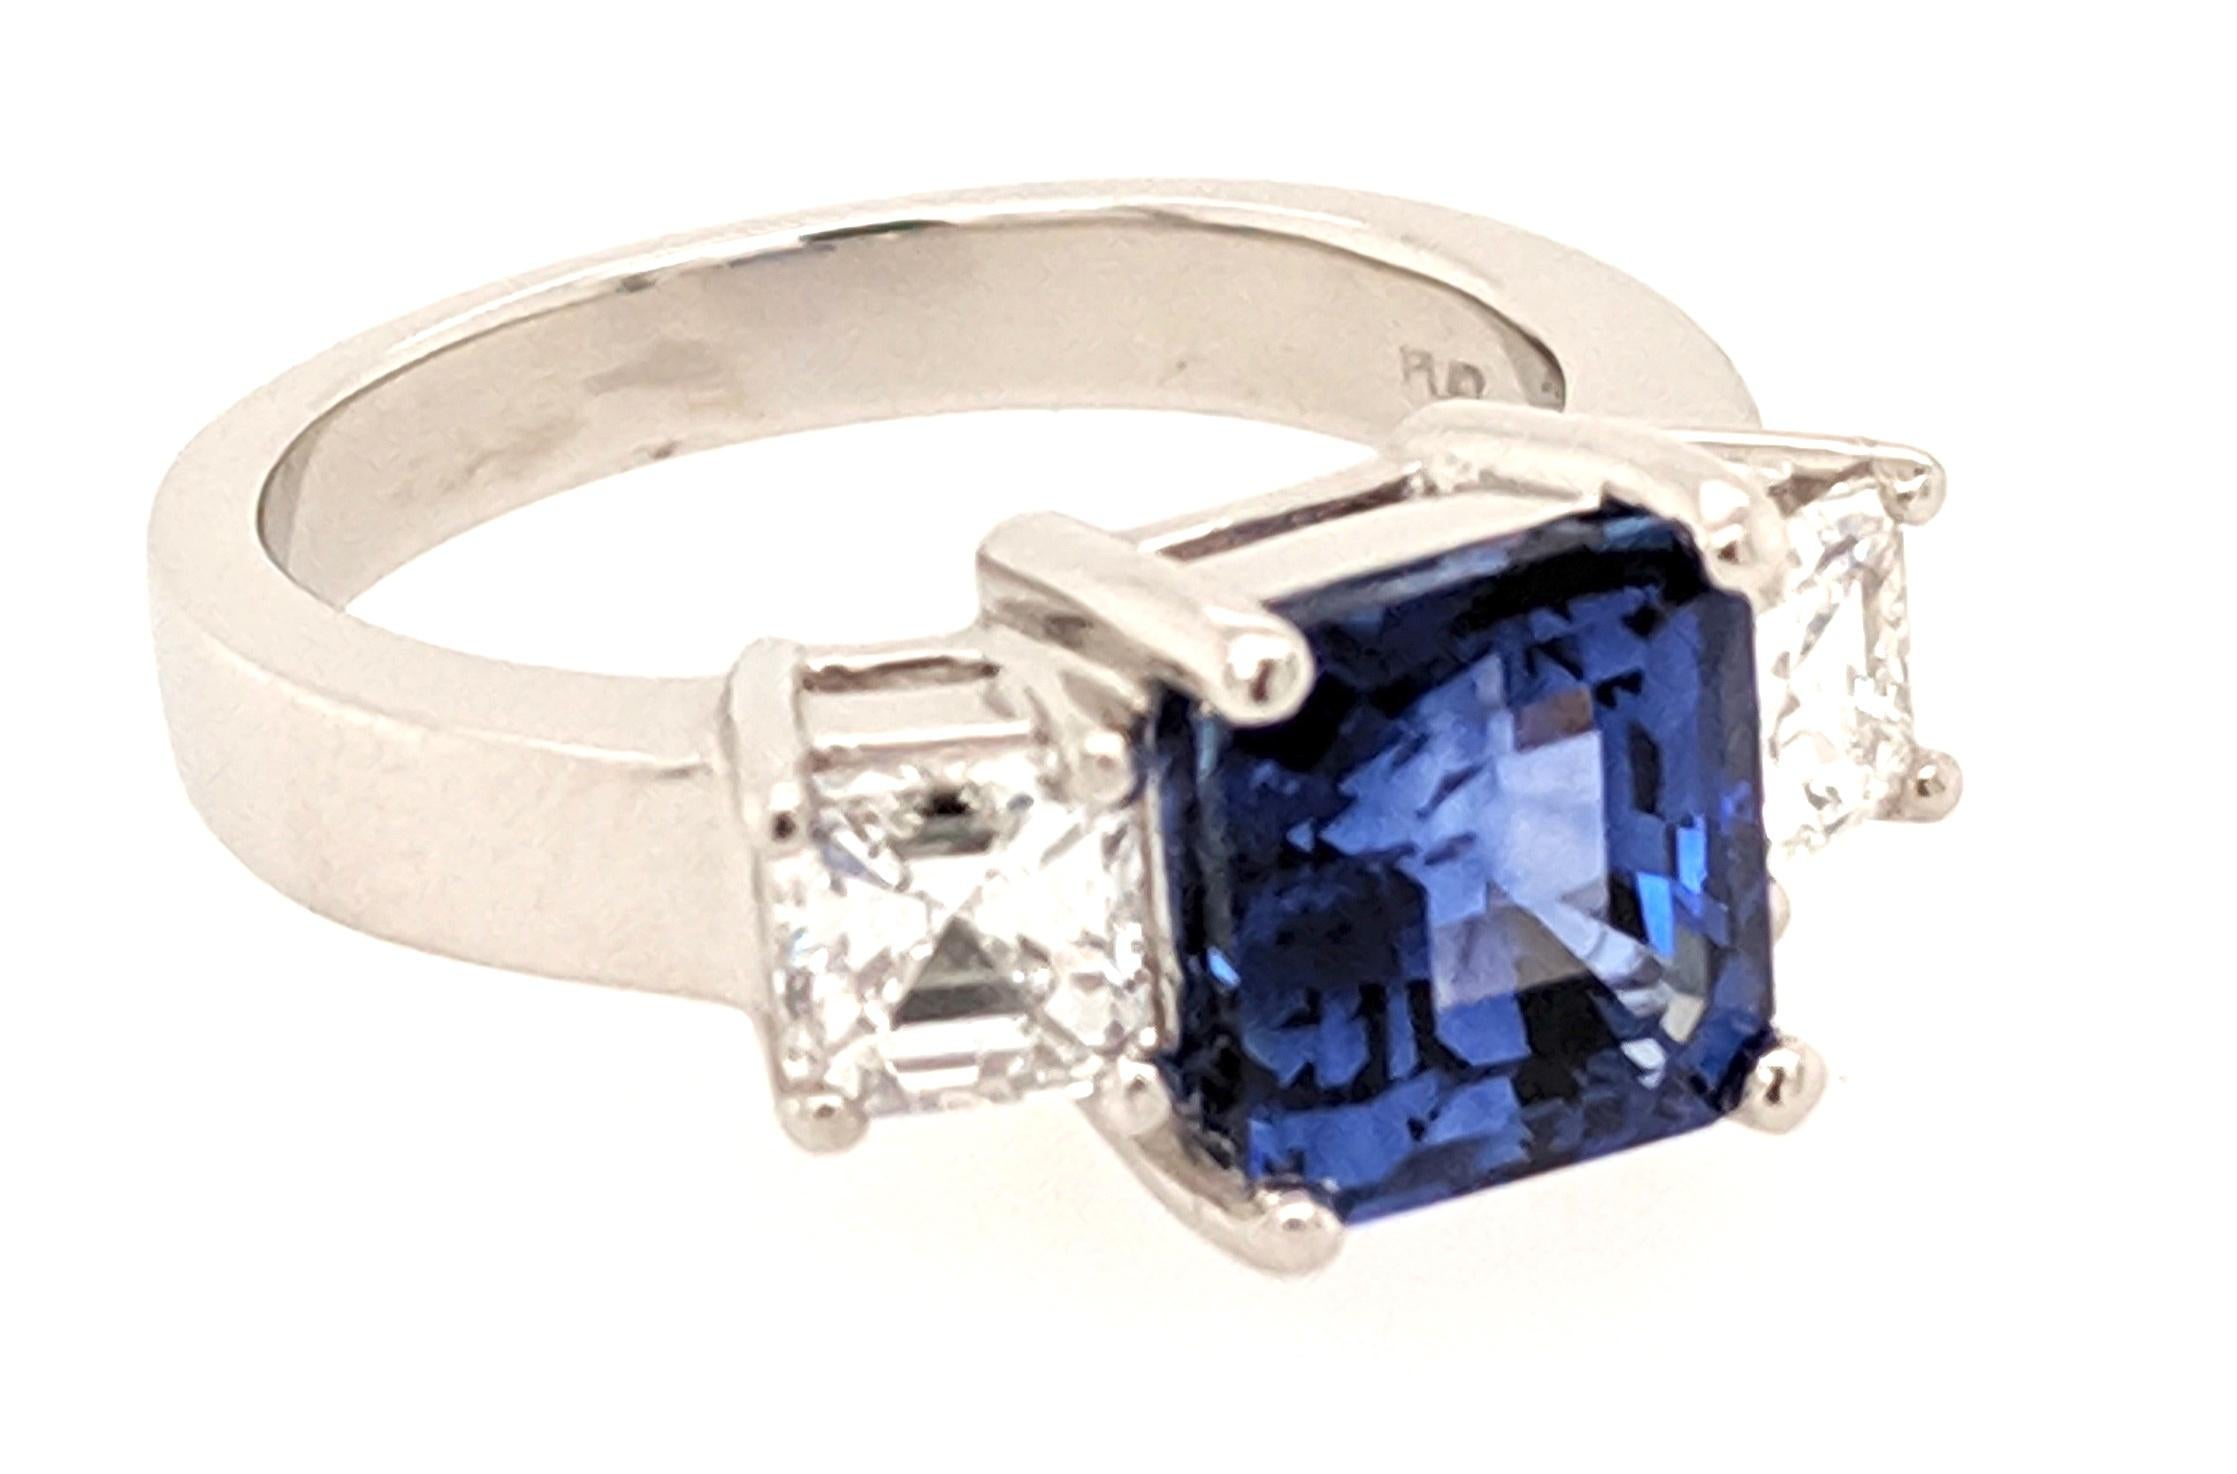 A 3 Stone Sapphire and Diamond Ring crafted in Platinum and Featuring (1) Asscher cut royal blue Sapphire from Madagascar weighing 3.31ct flanked by (2) Asscher cut diamonds weighing 1.01cttw with a color of F/G and a clarity of VS1. The ring is a